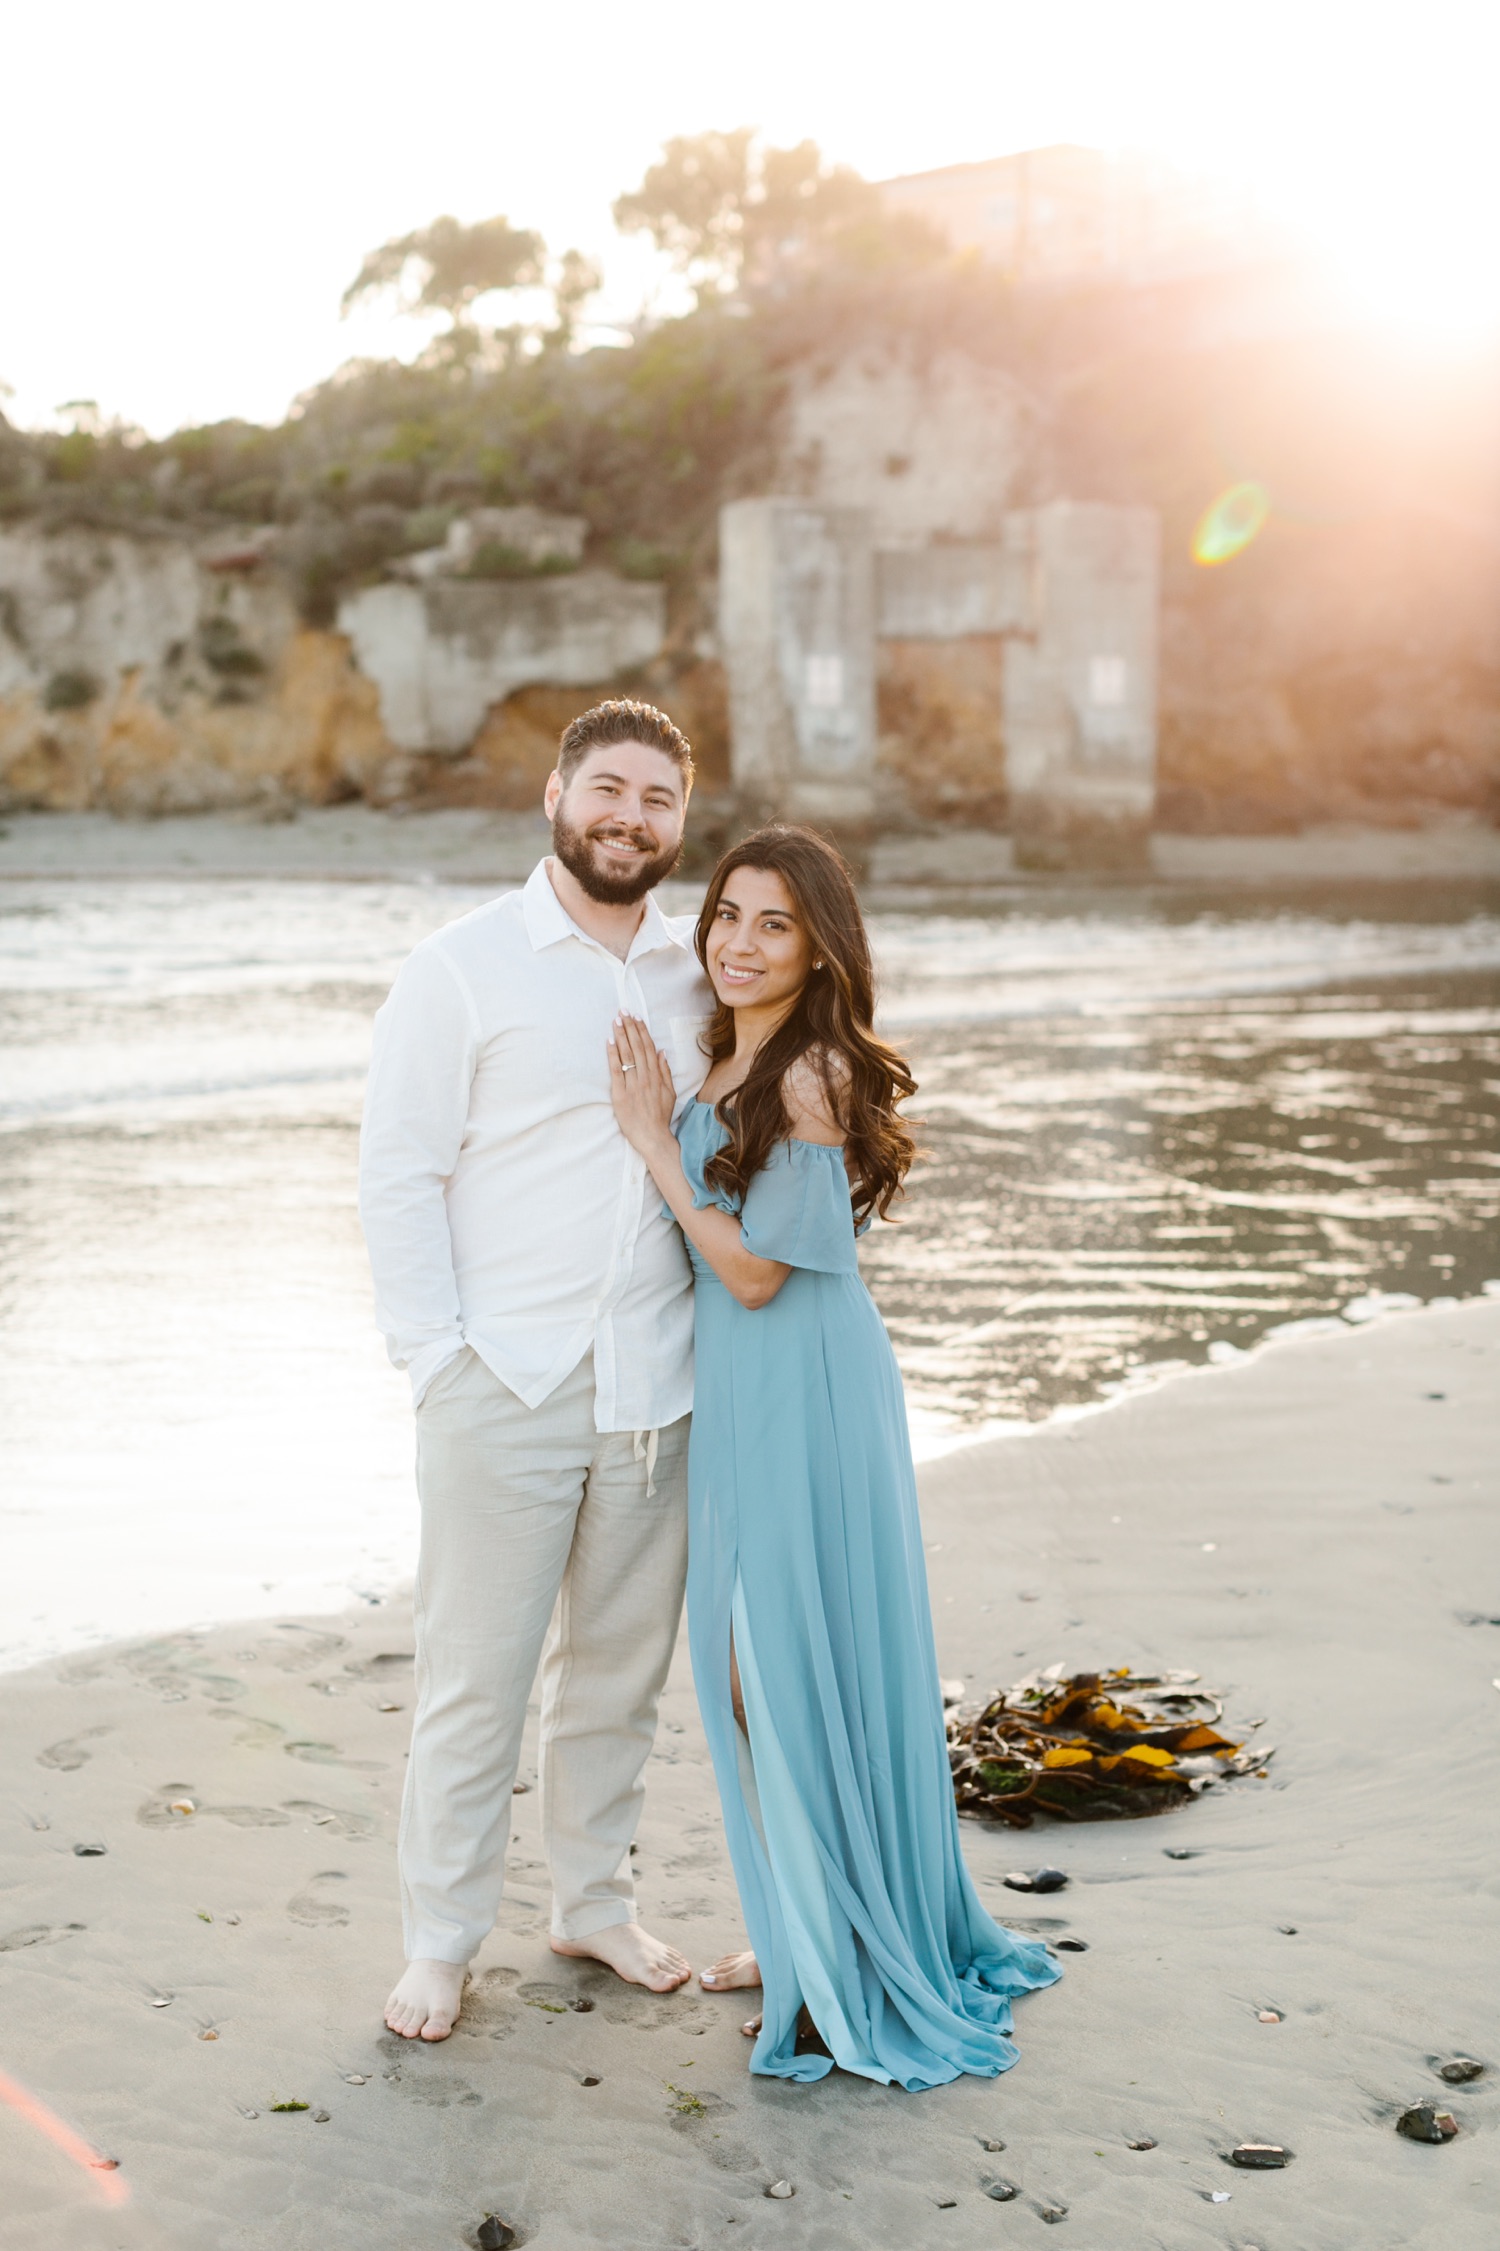 Couple embraces at Avila beach engagement session by Tayler enerle photography